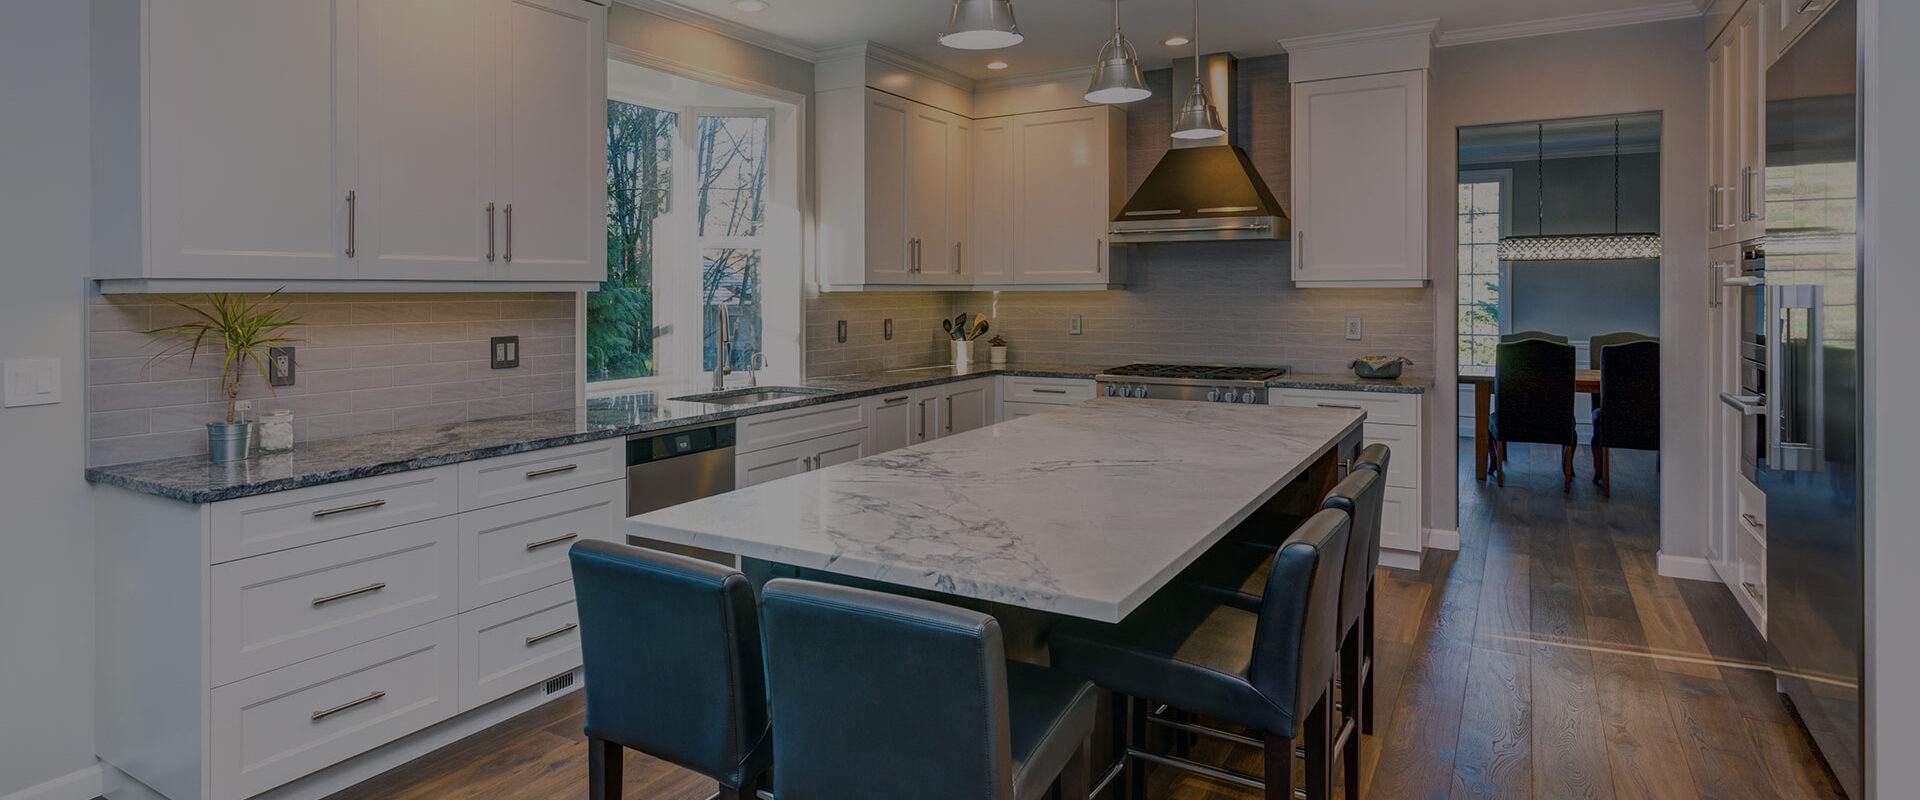 kitchen interiors remodeled with new cabinets and countertops albuquerque nm